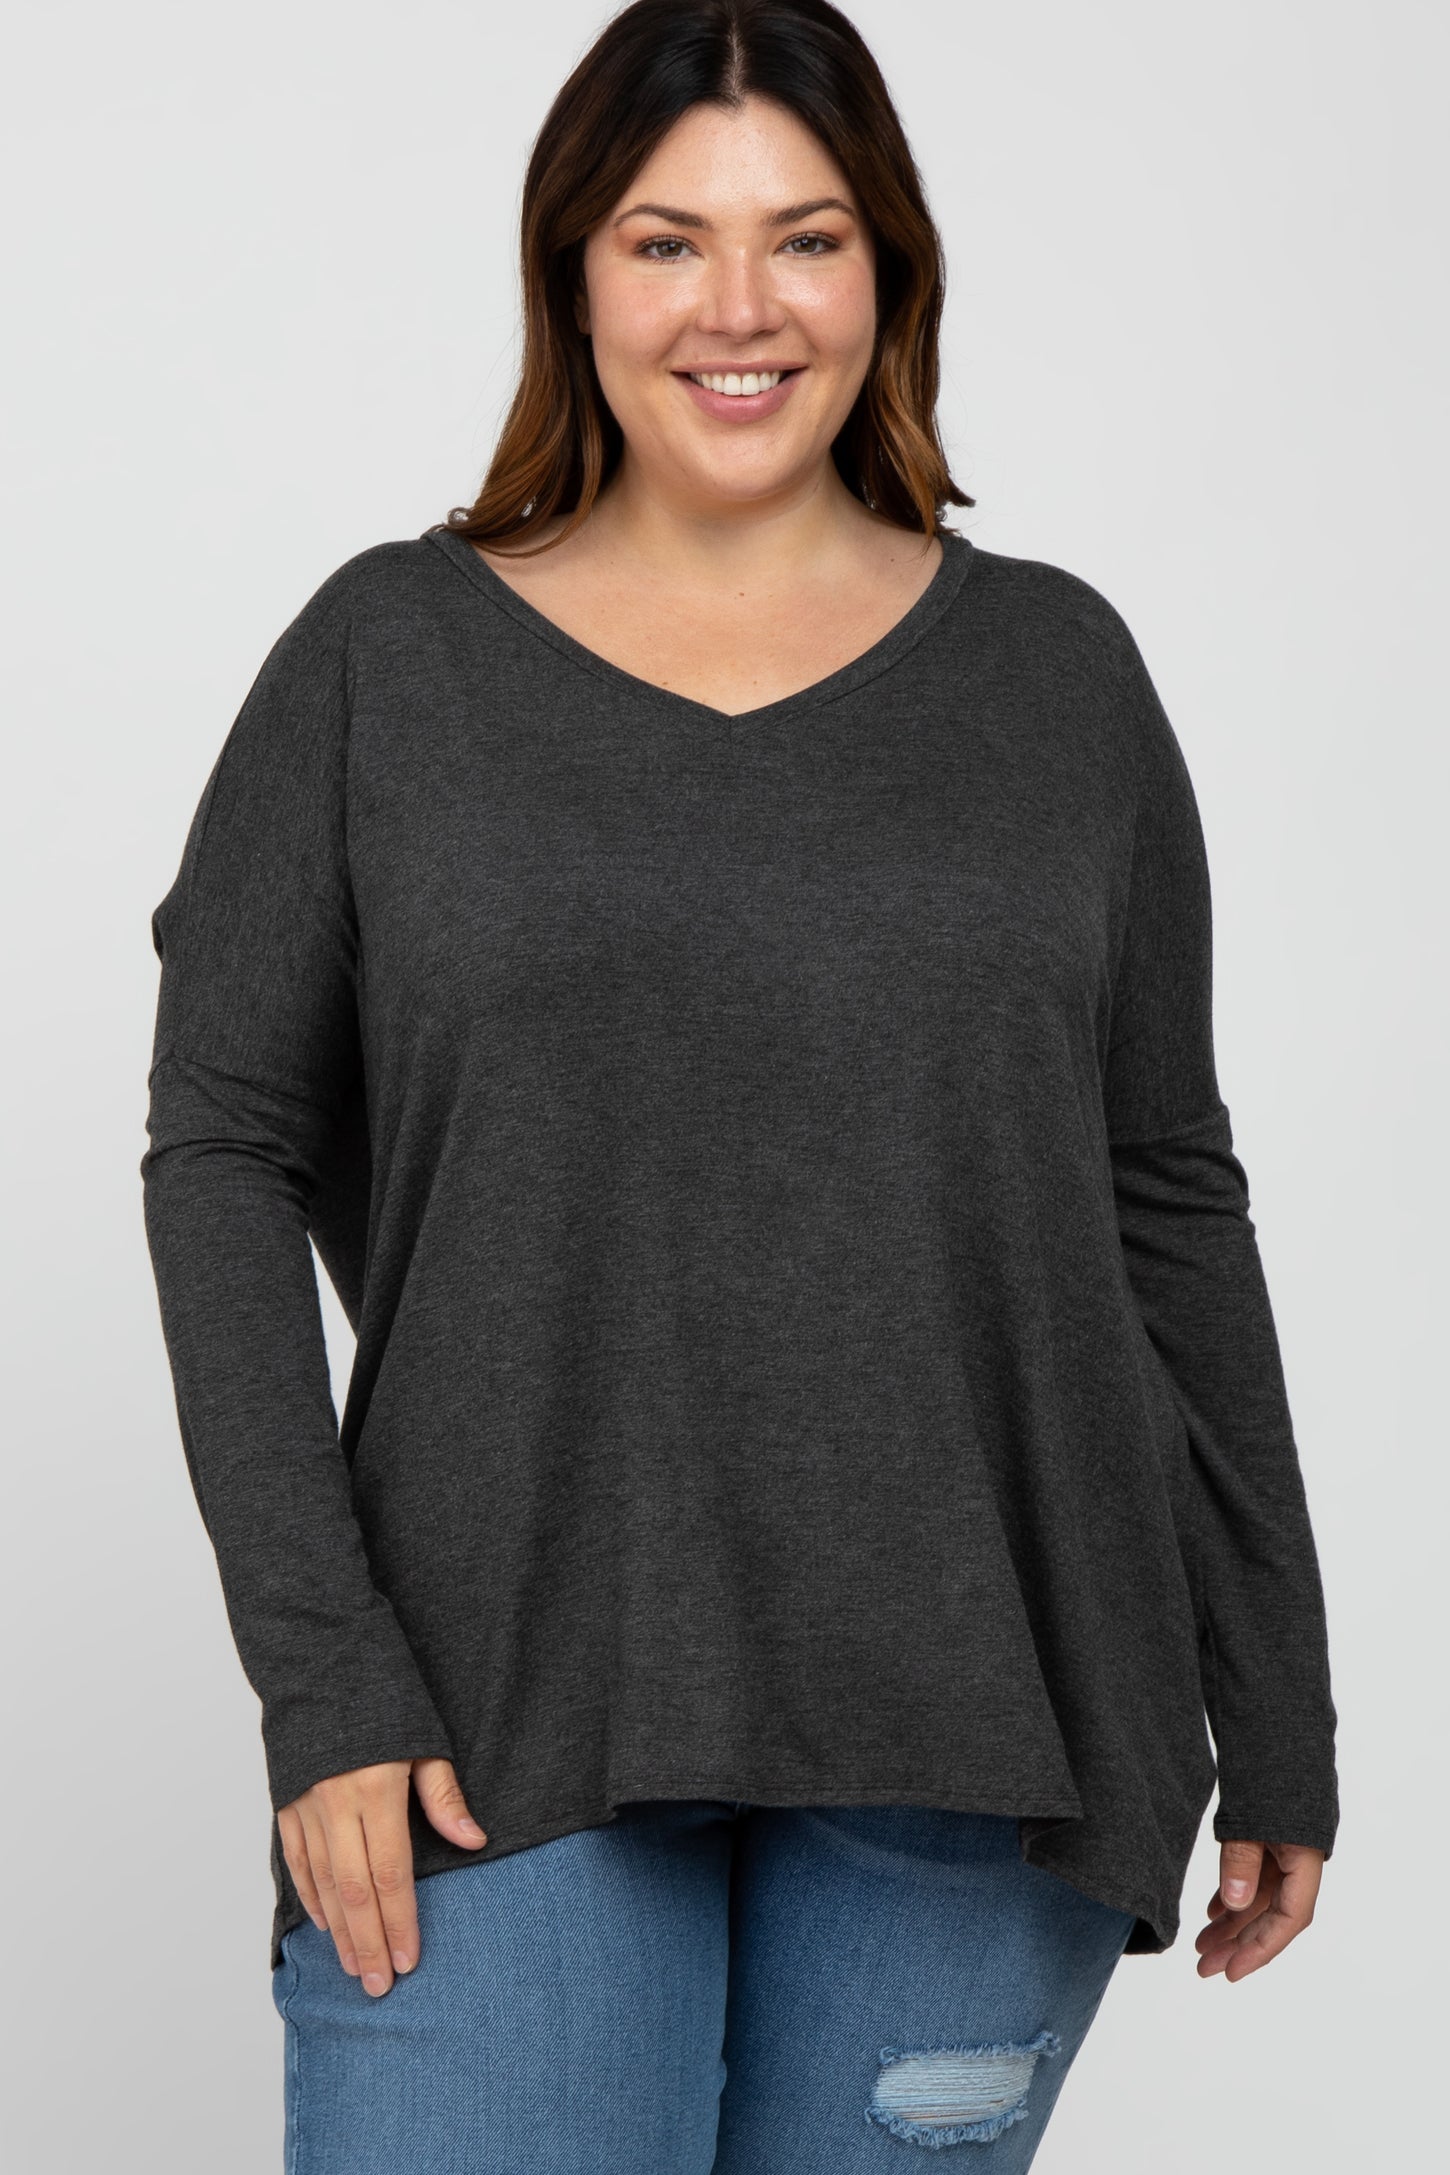 Charcoal V-Neck Maternity Plus Top